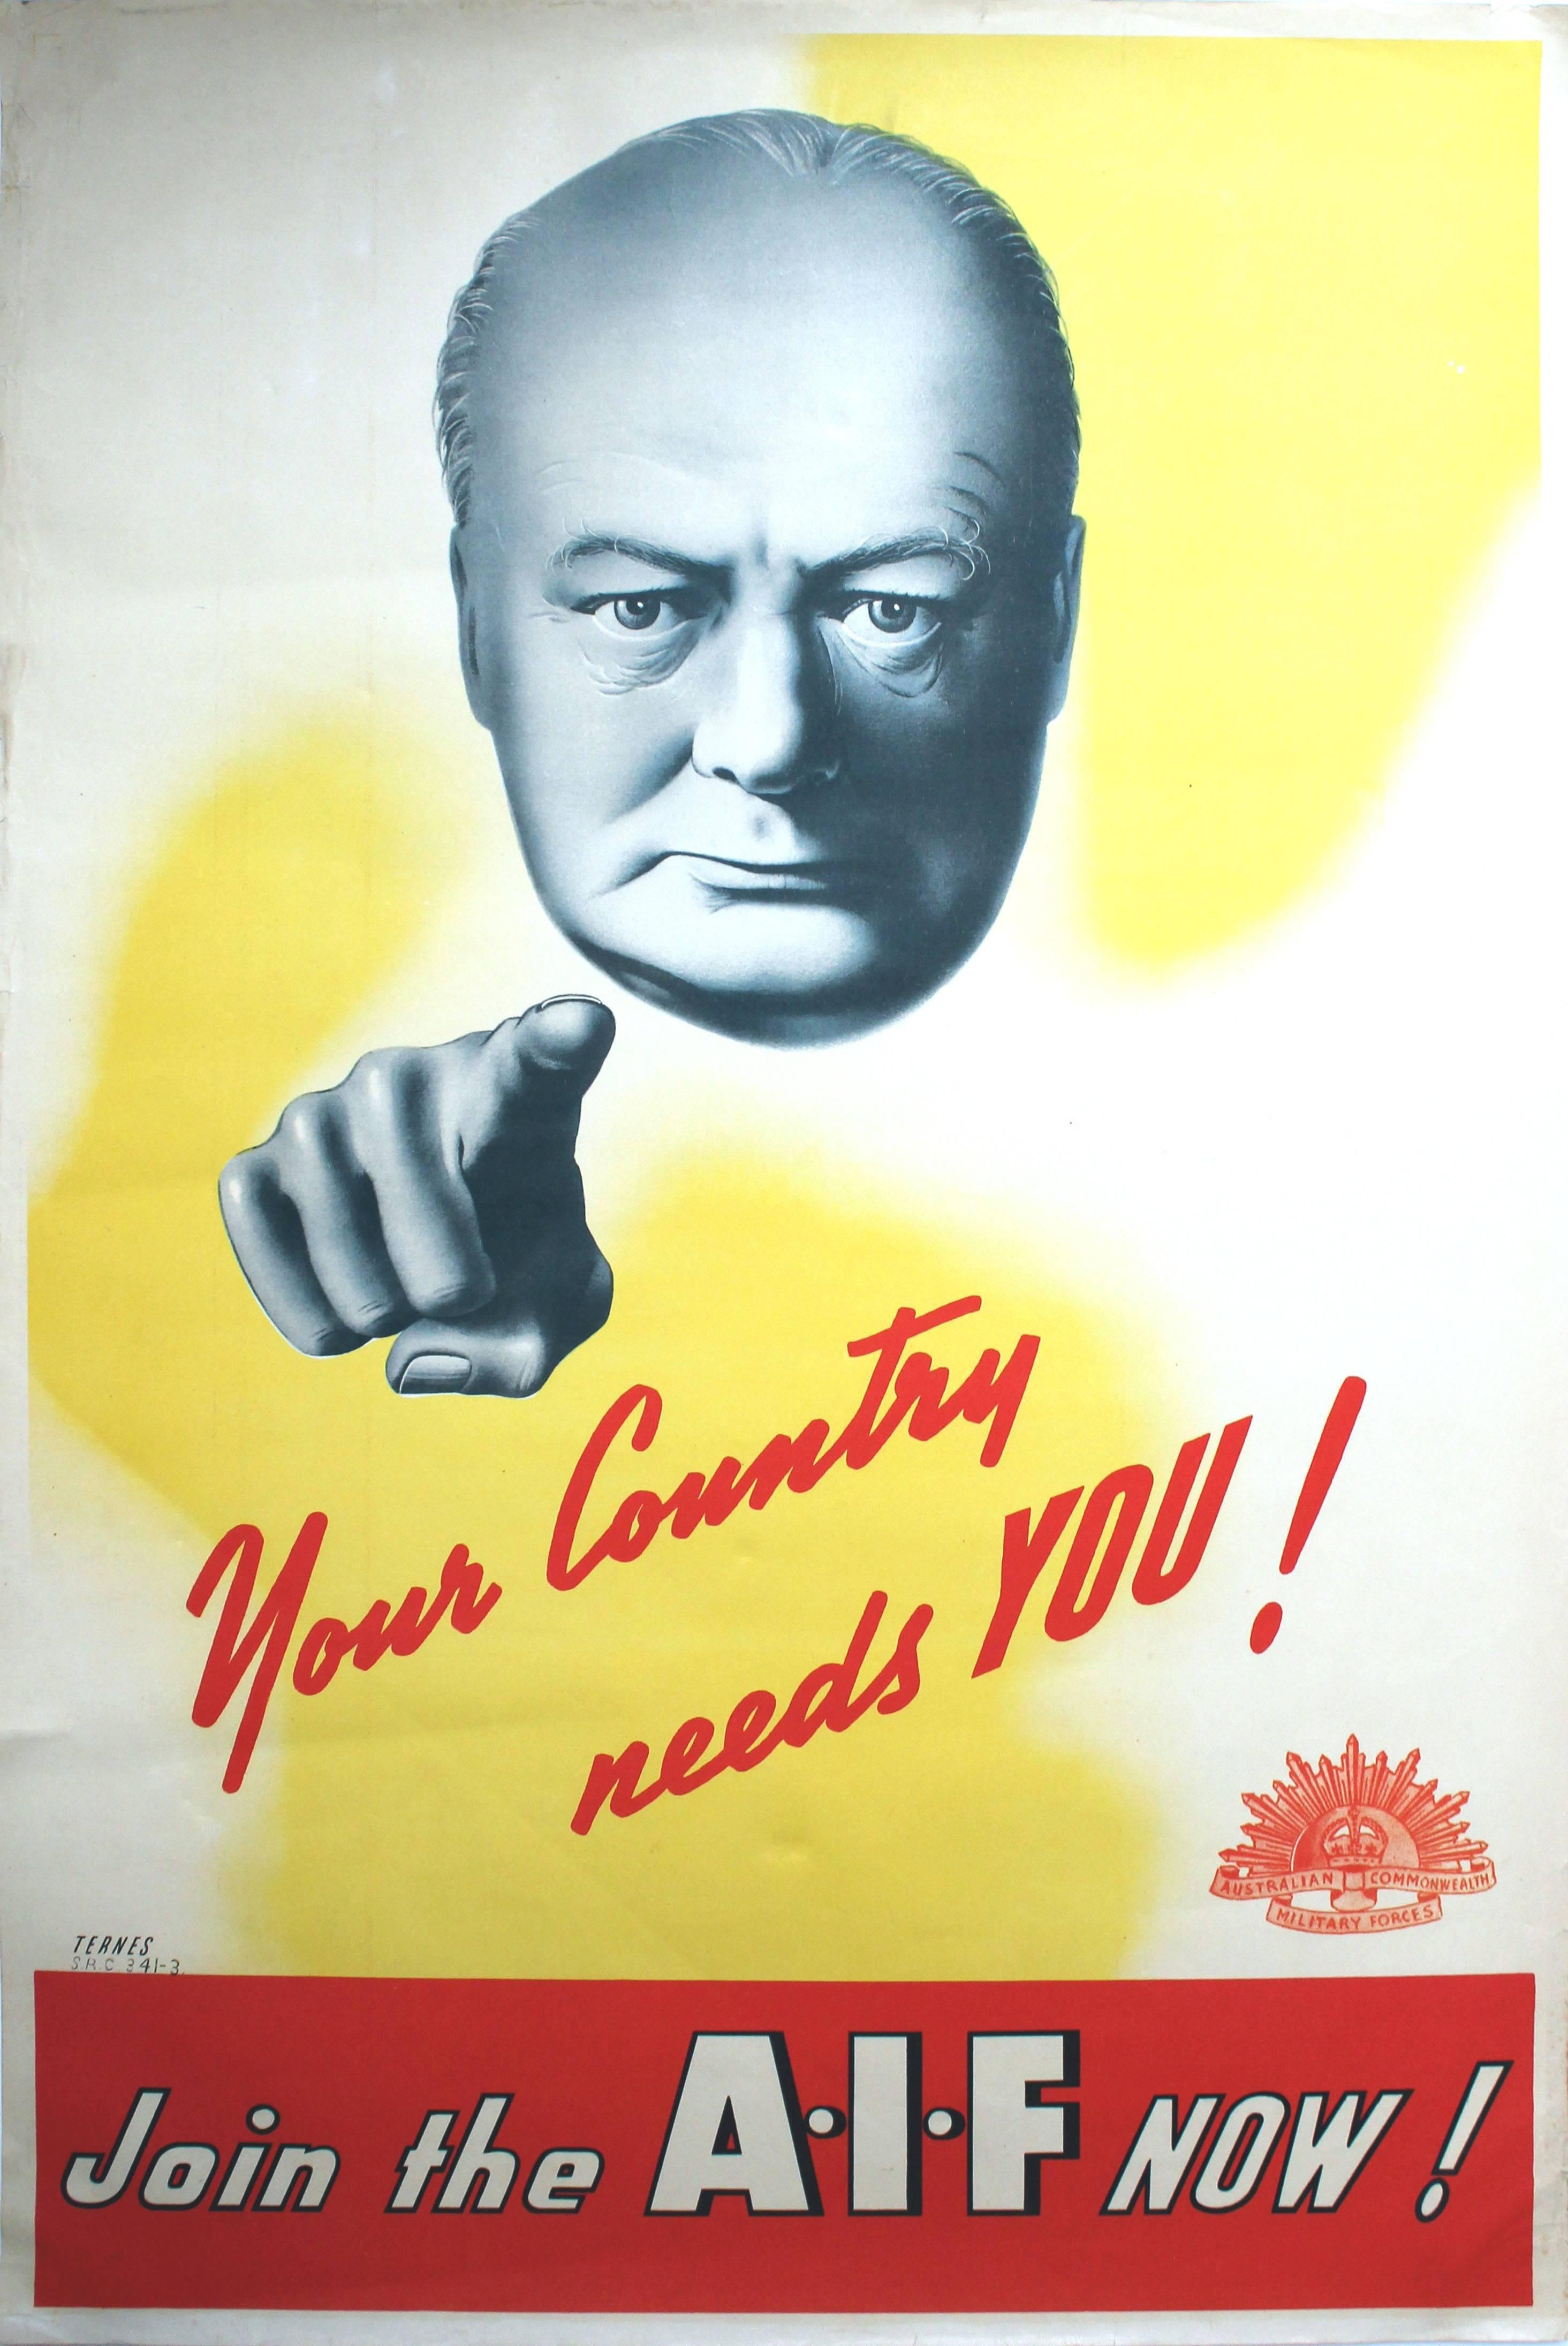 Ternes Print - Original World War Two Poster - Churchill "Your Country Needs You!" - Australia